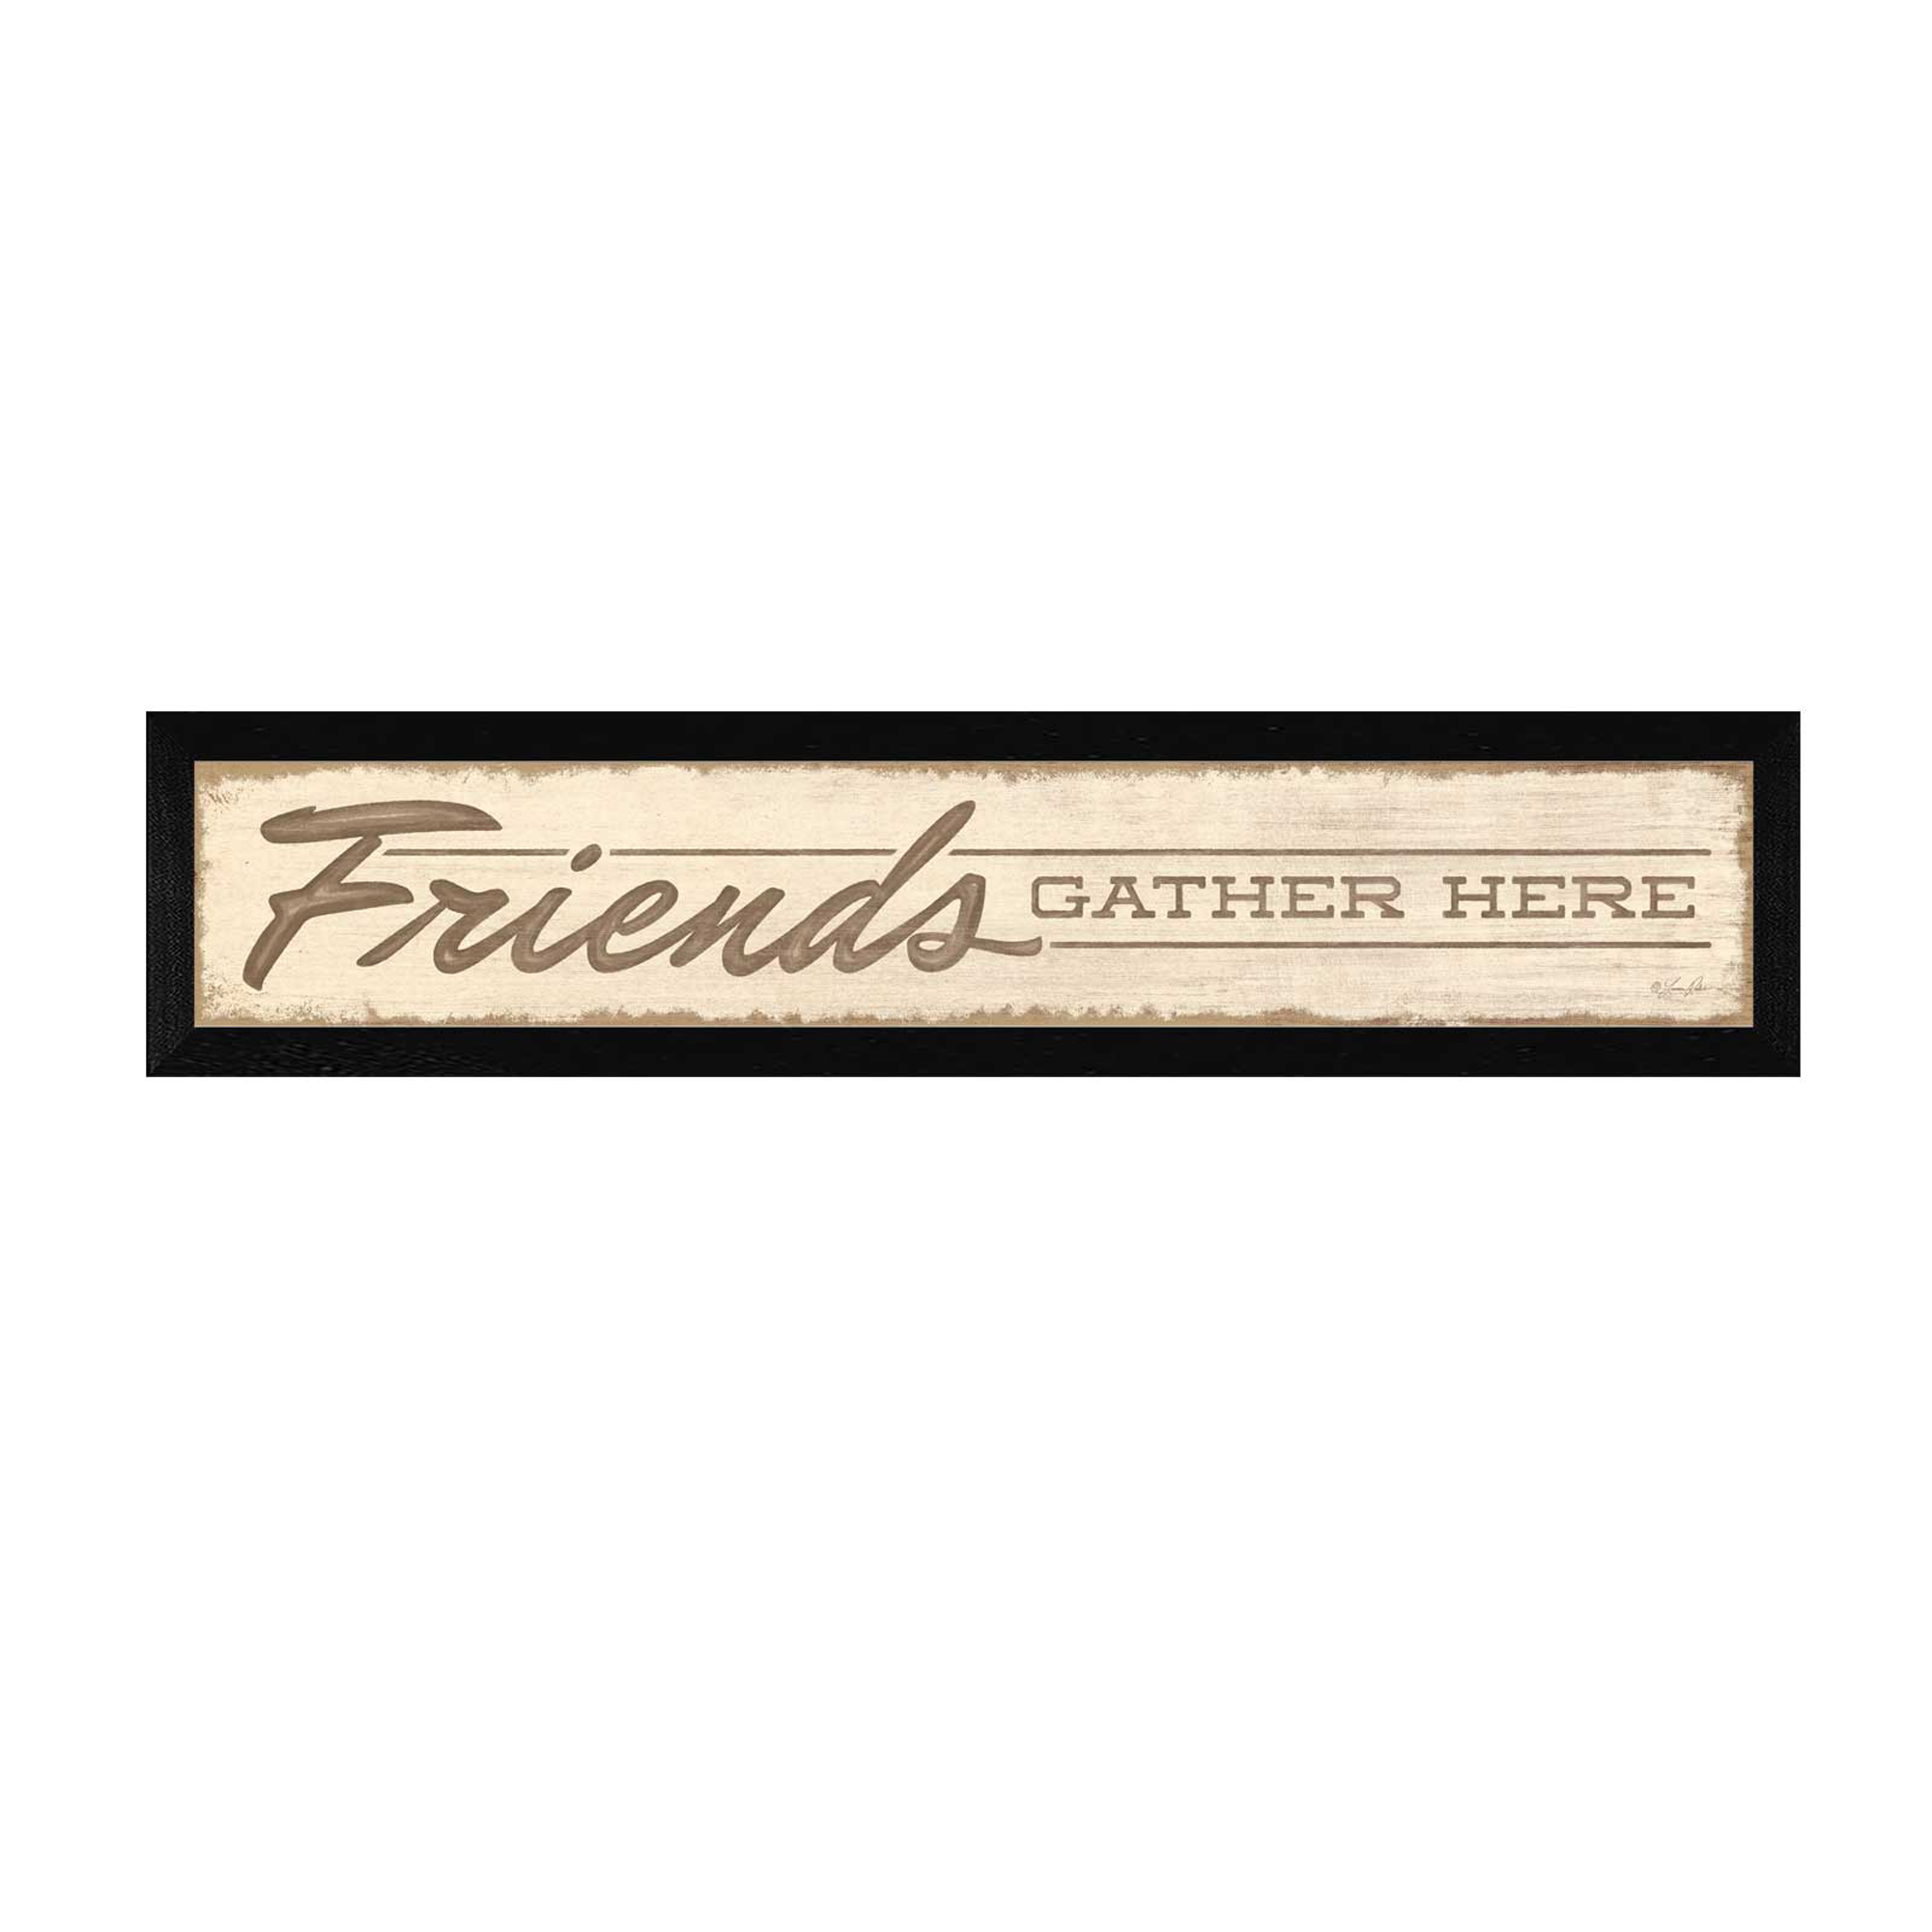 "Friend a Gather Here" By Lauren Rader, Printed Wall Art, Ready To Hang Framed Poster, Black Frame